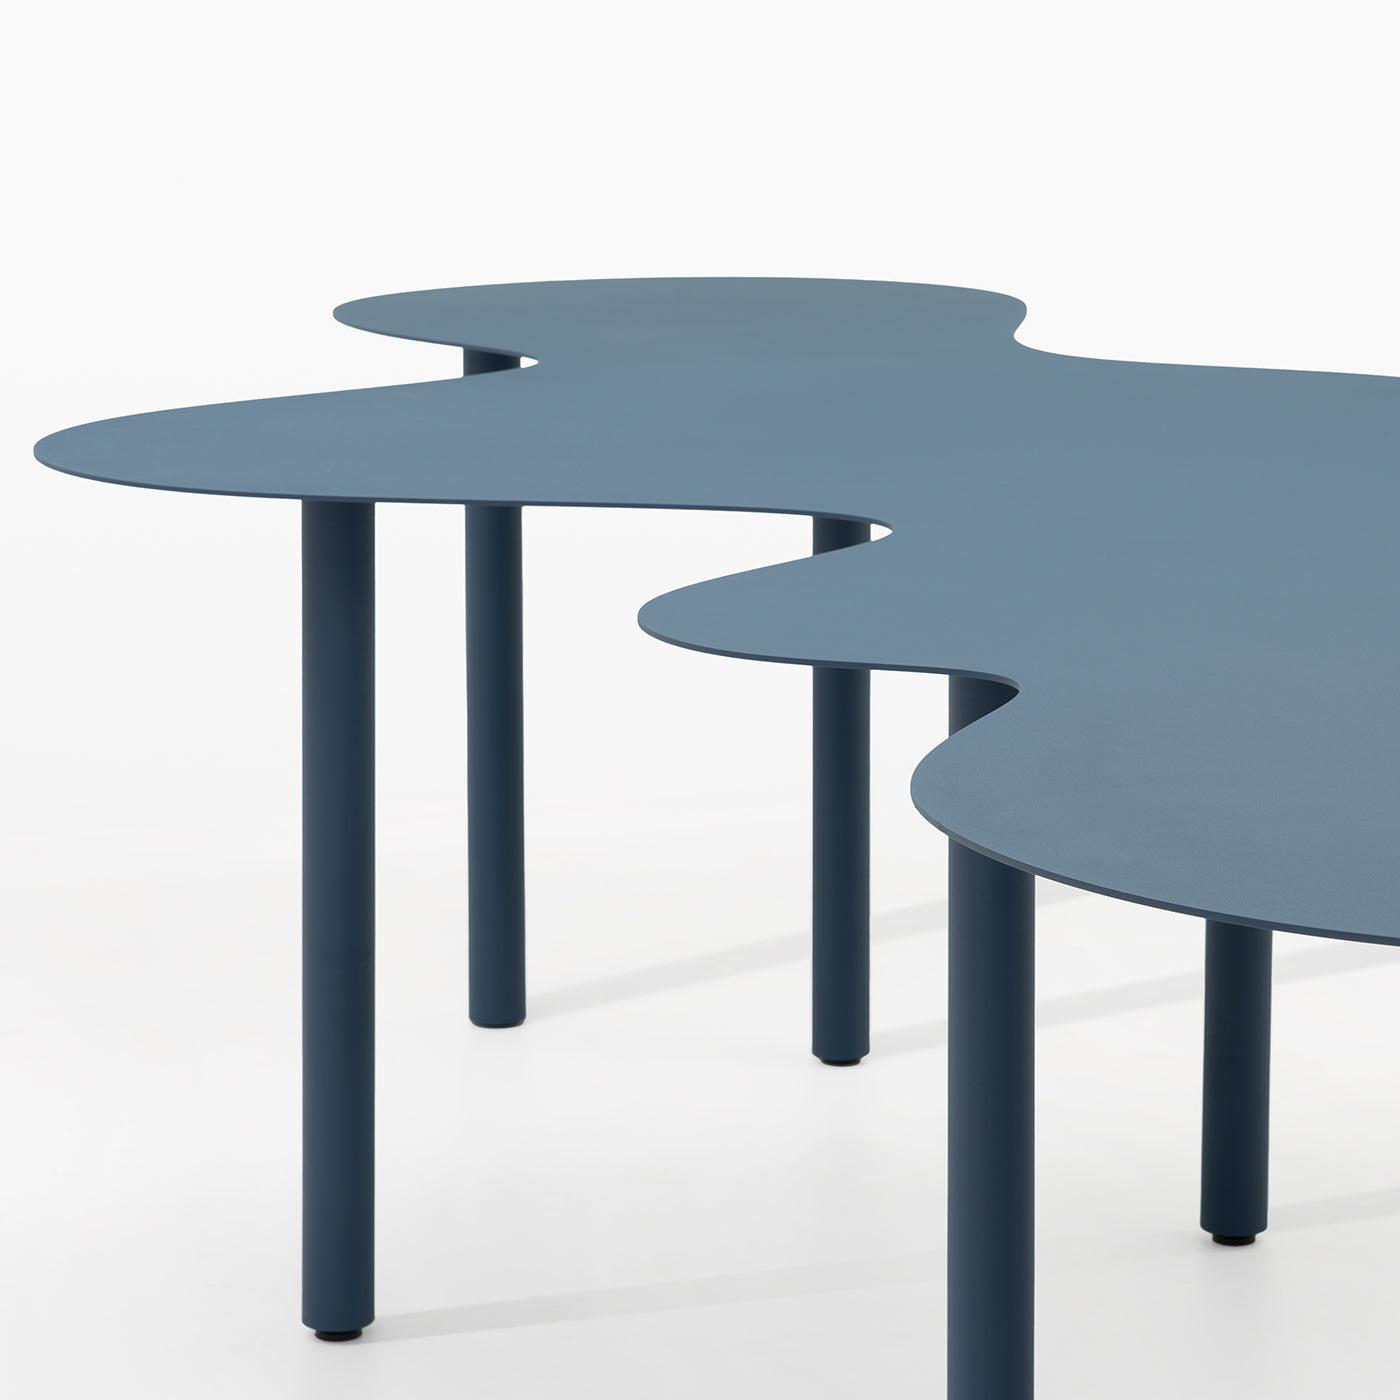 Nuvola 01 Dining Table - Alternative view 1